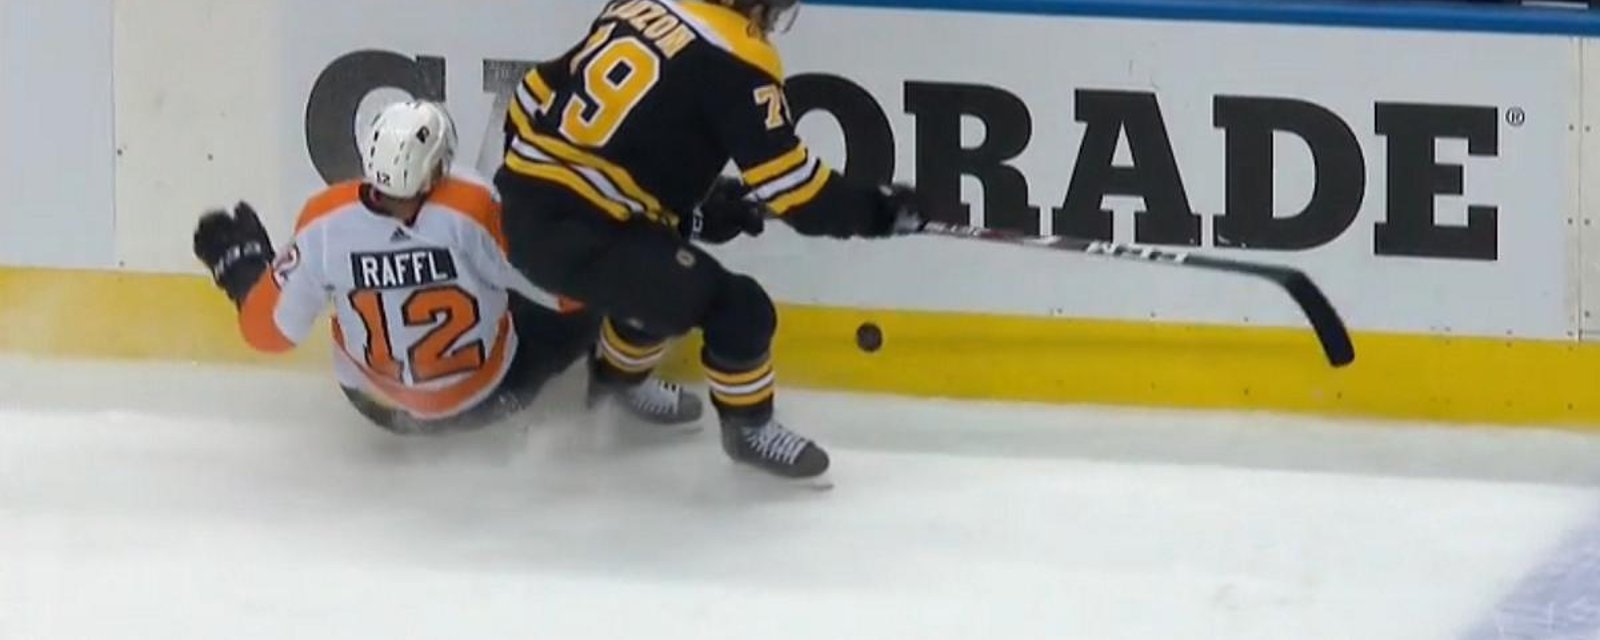 Michael Raffl leaves the game after awkward hit along the boards.